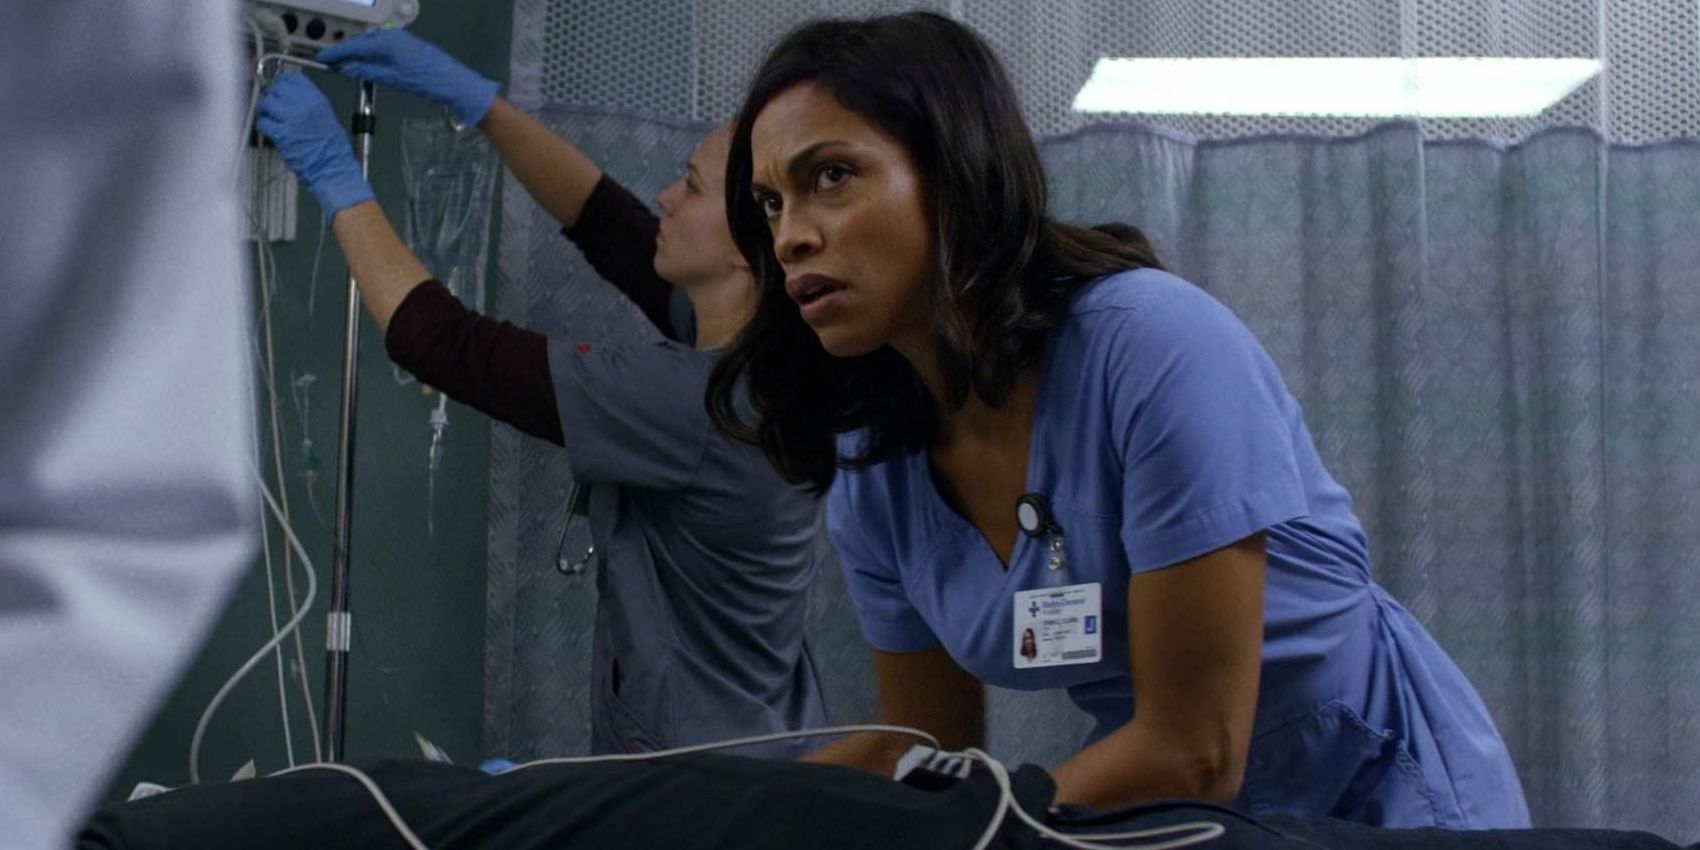 Claire Temple works on a patient in Daredevil series.